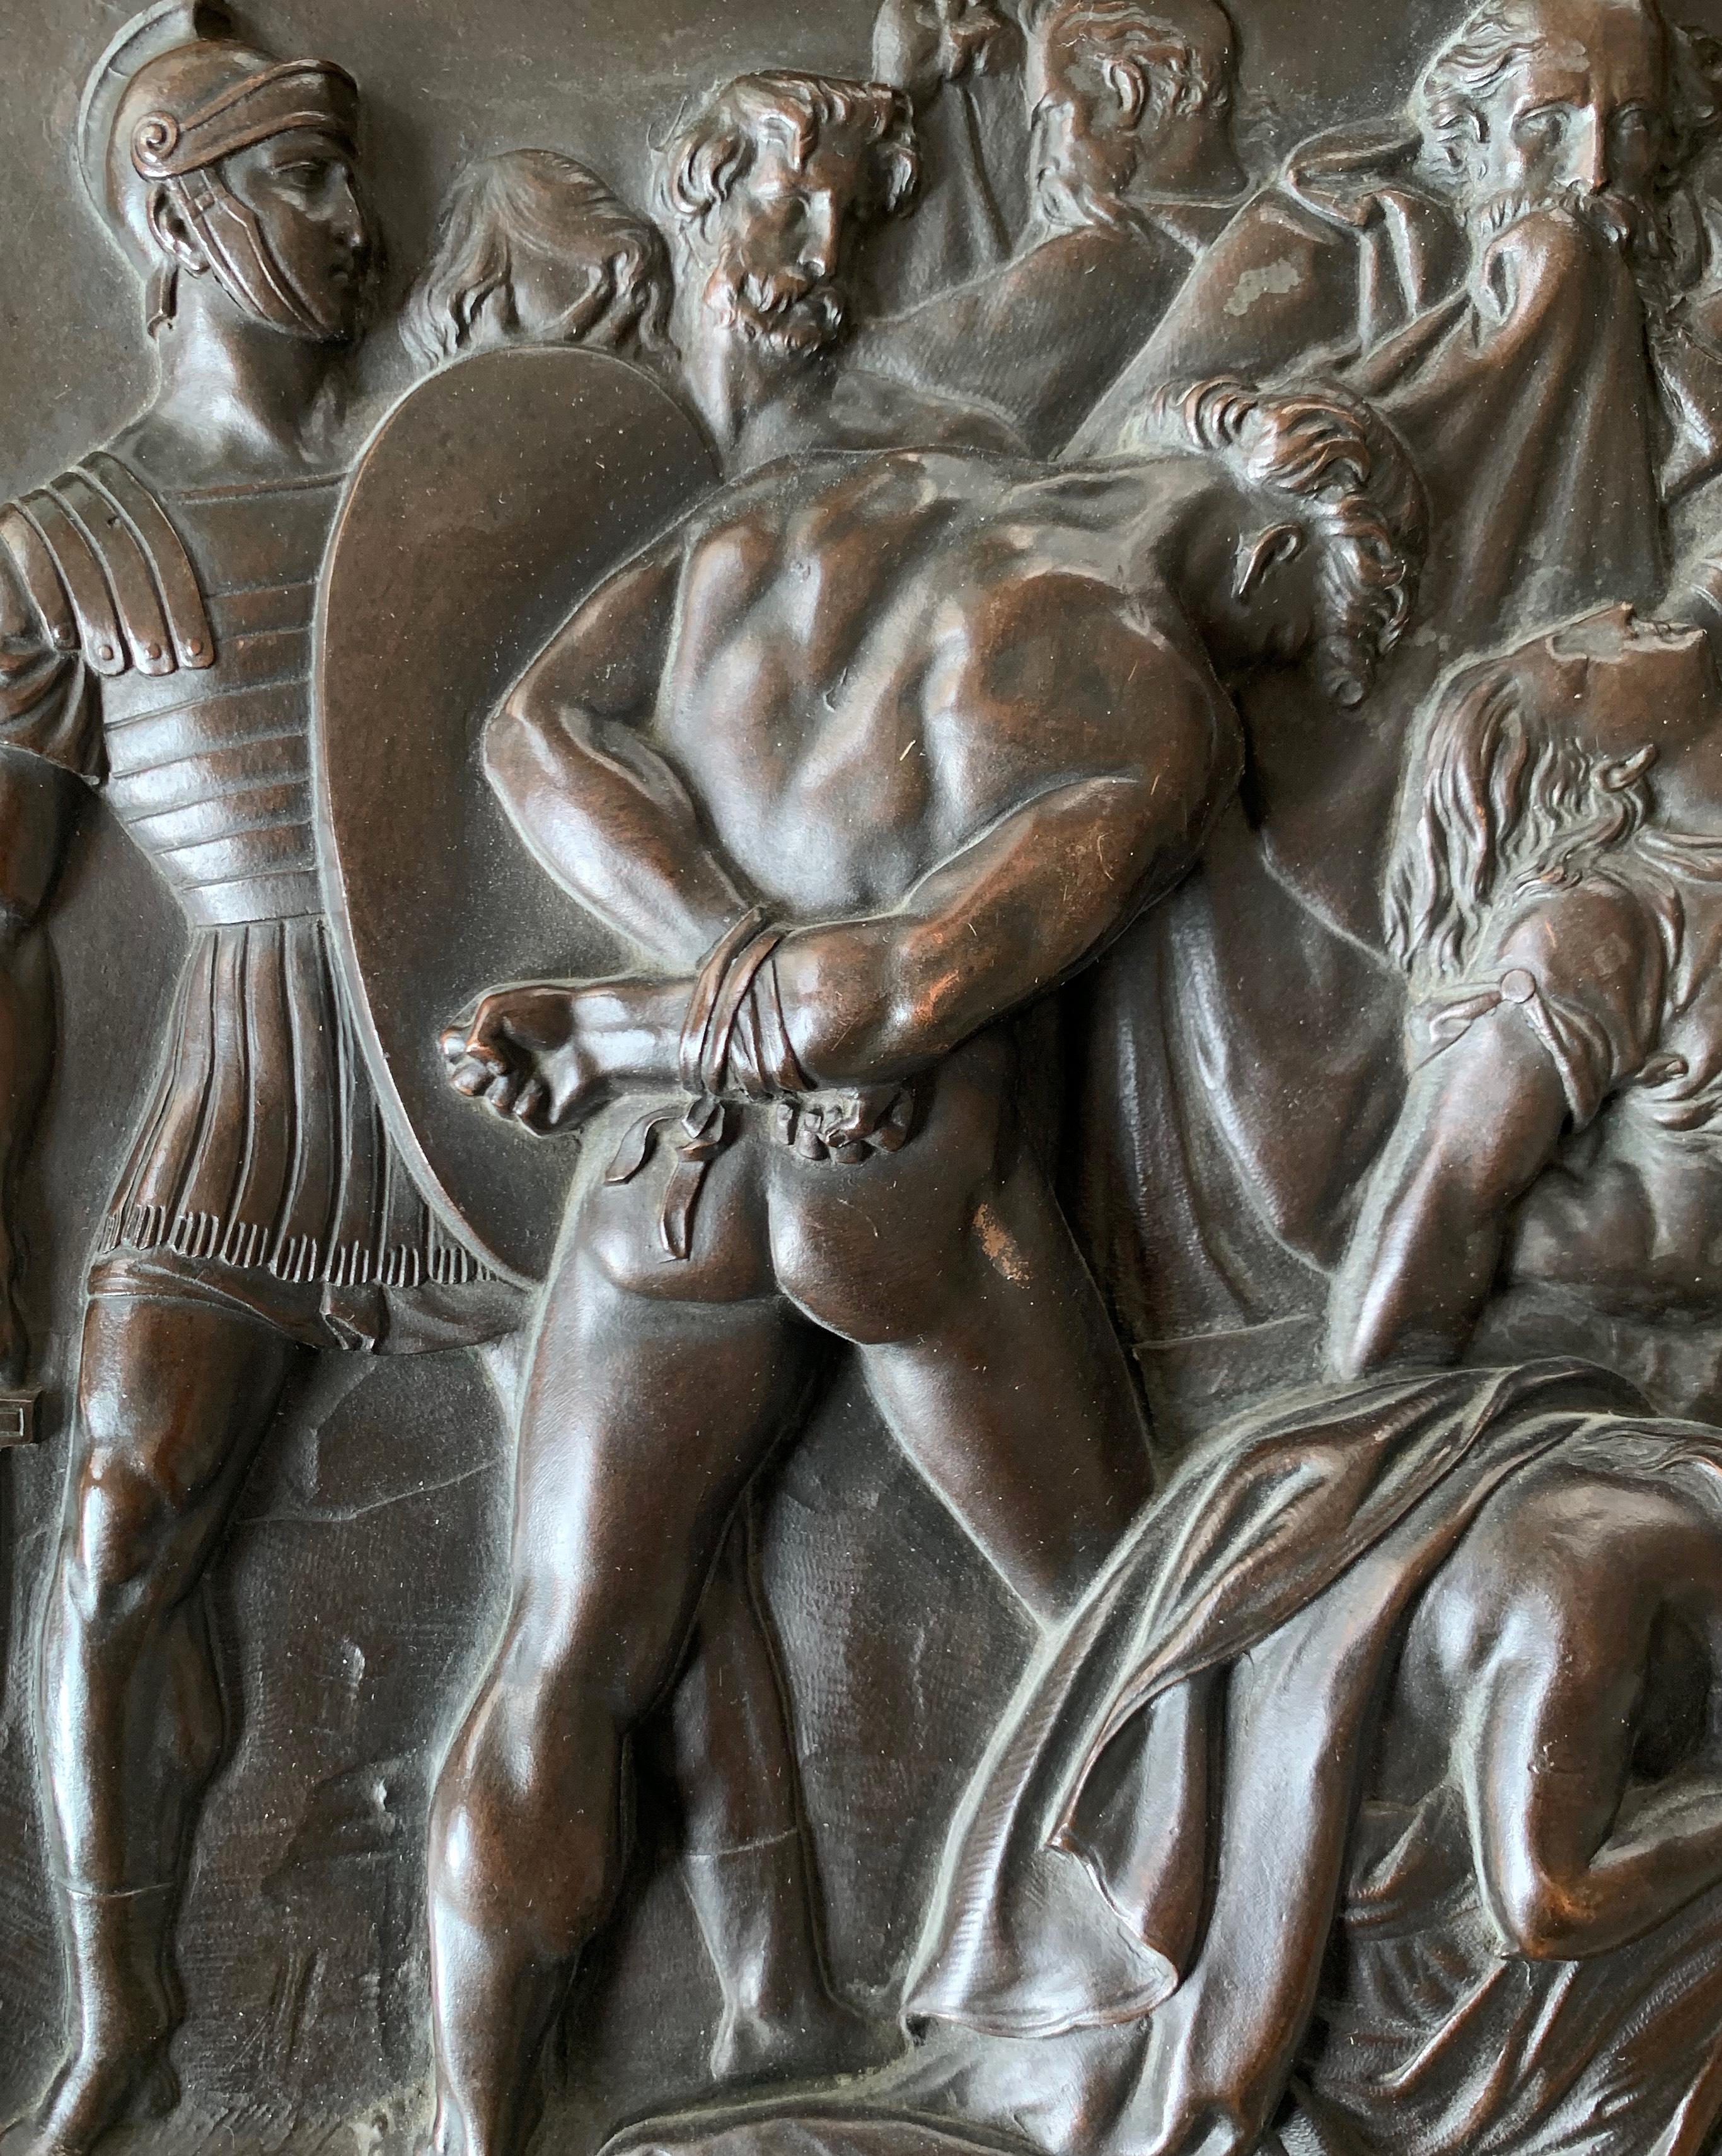 Beautifully detailed and masterfully cast and patinated, this bronze panel, probably from the late 19th or early 20th centuries, depicts a frieze of Roman soldiers at the end of battle, arrayed across the field with the forces they defeated either